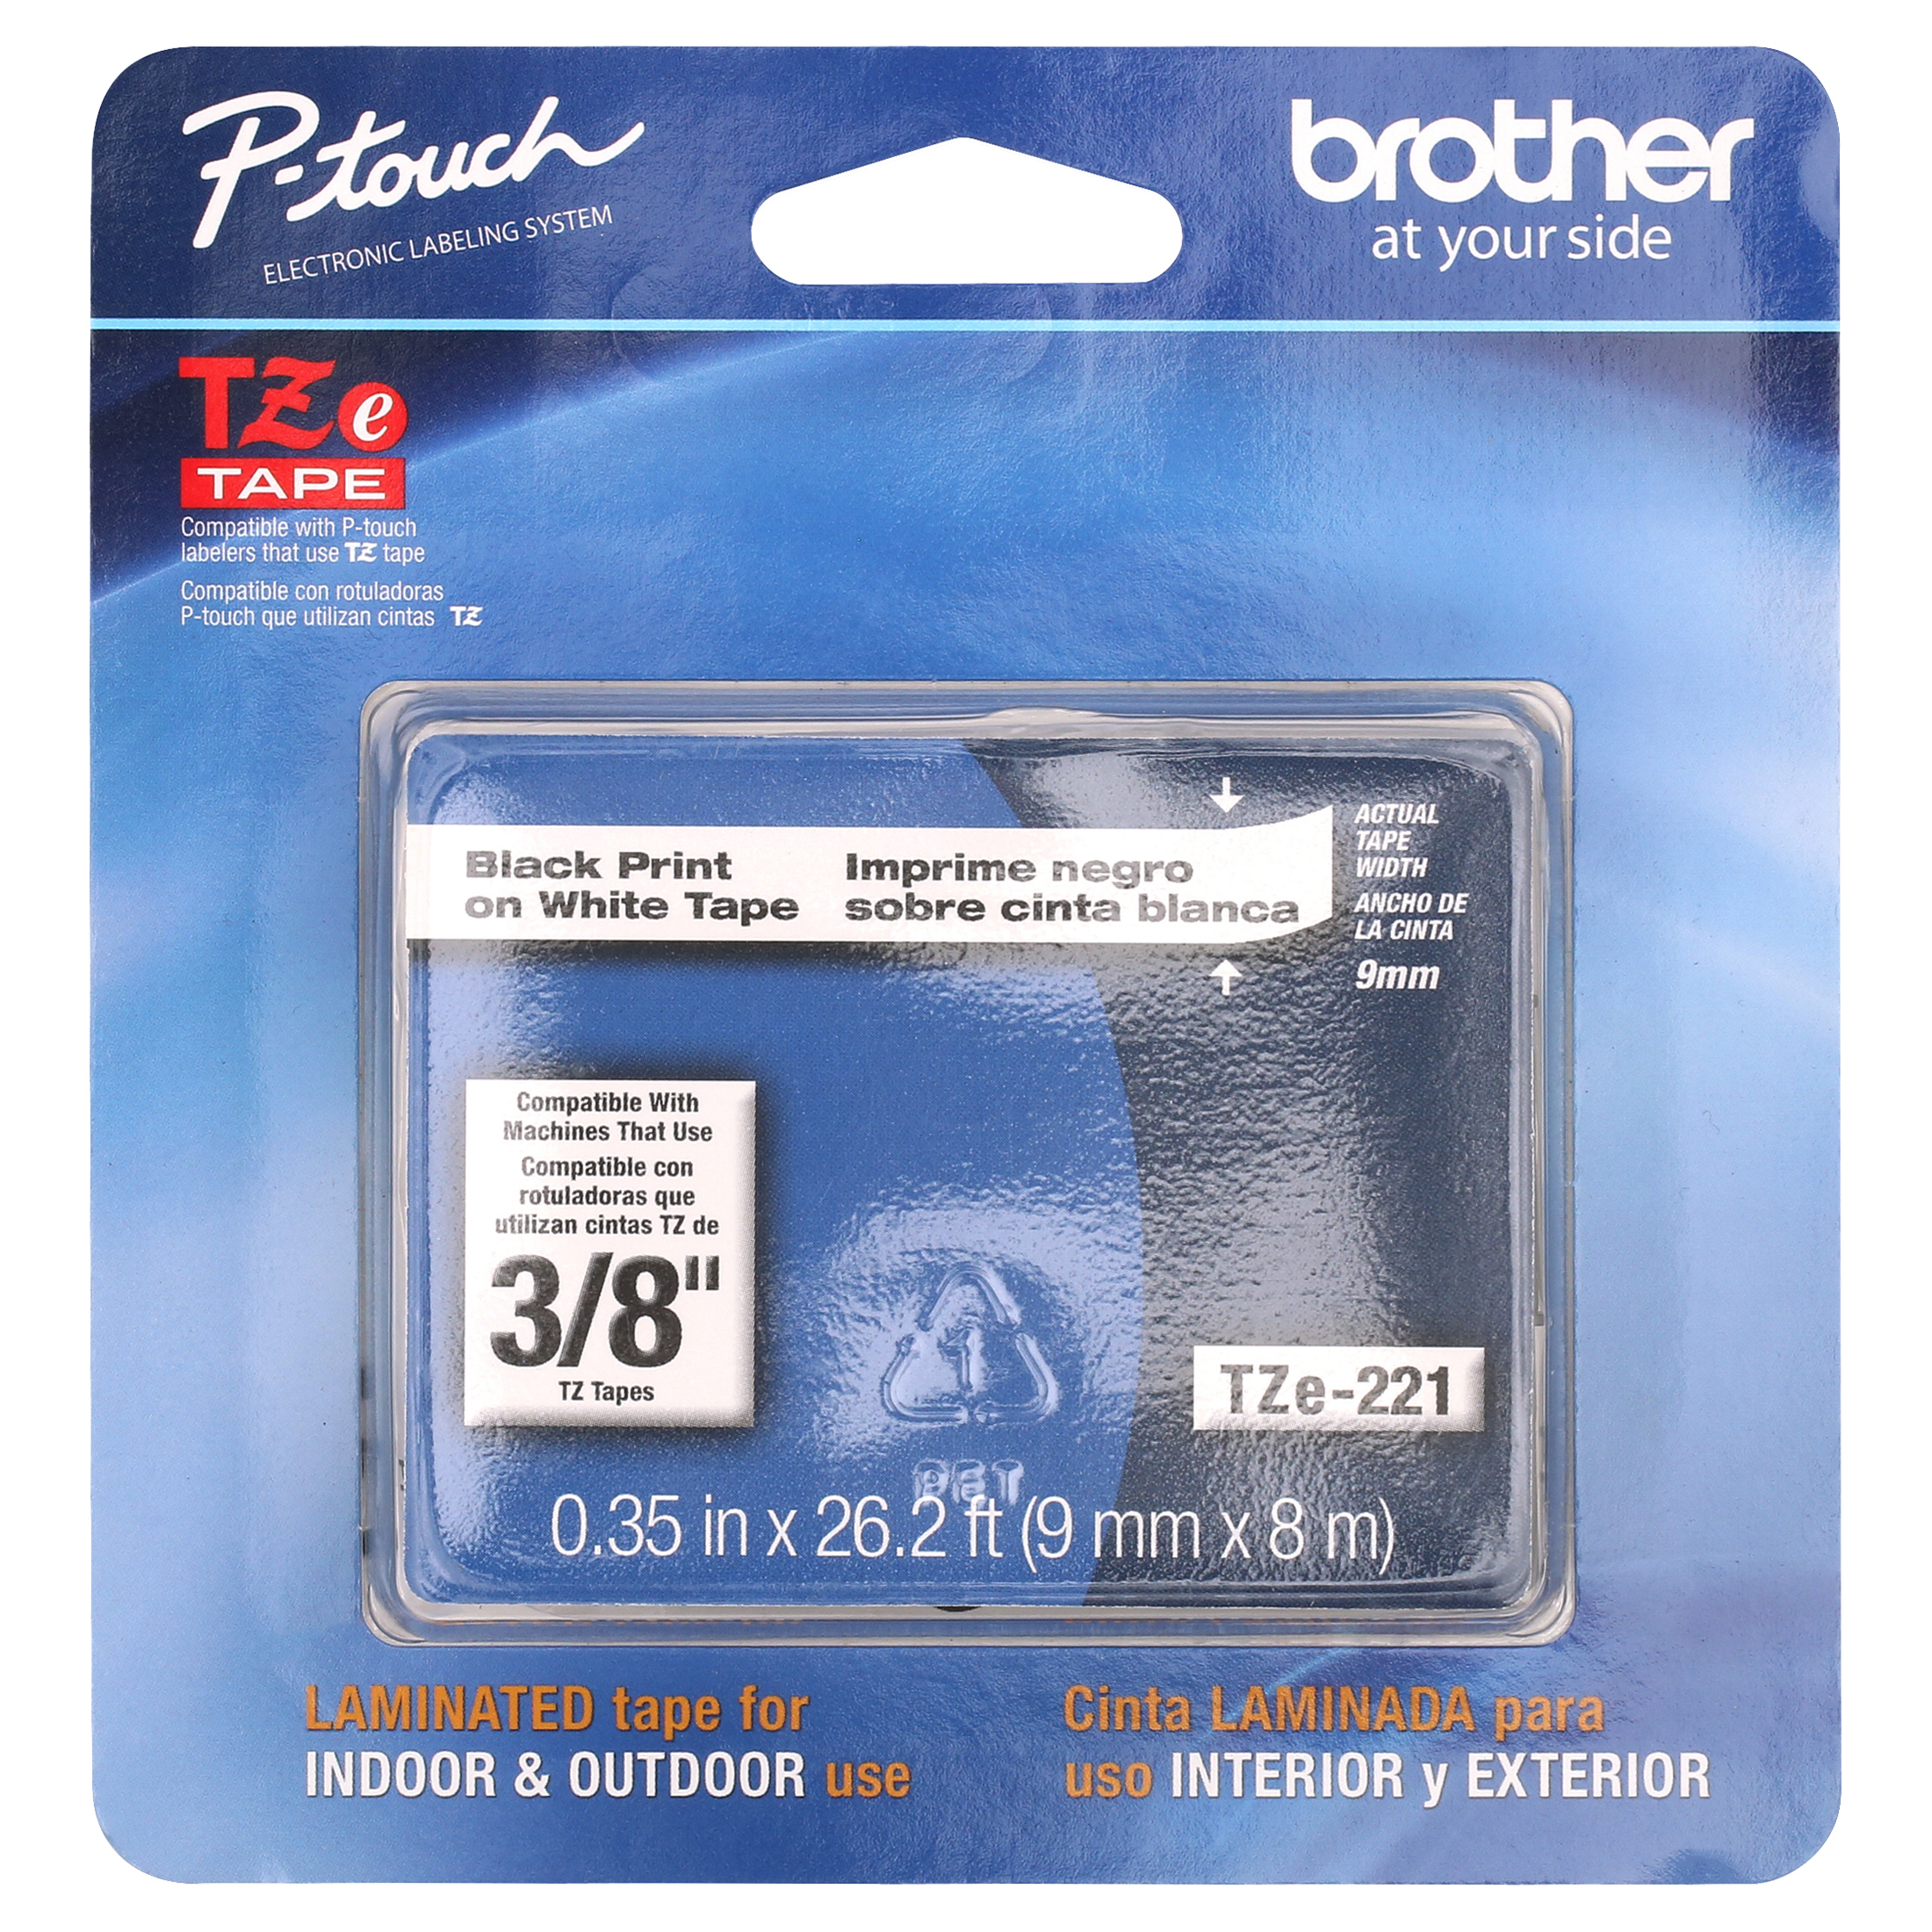 Brother Genuine P-touch TZE-221 Tape, 3/8" (0.35") Standard Laminated P-touch Tape, Black on White, Laminated for Indoor or Outdoor Use, Water Resistant, 26.2 Feet (8M), Single-Pack - image 5 of 10